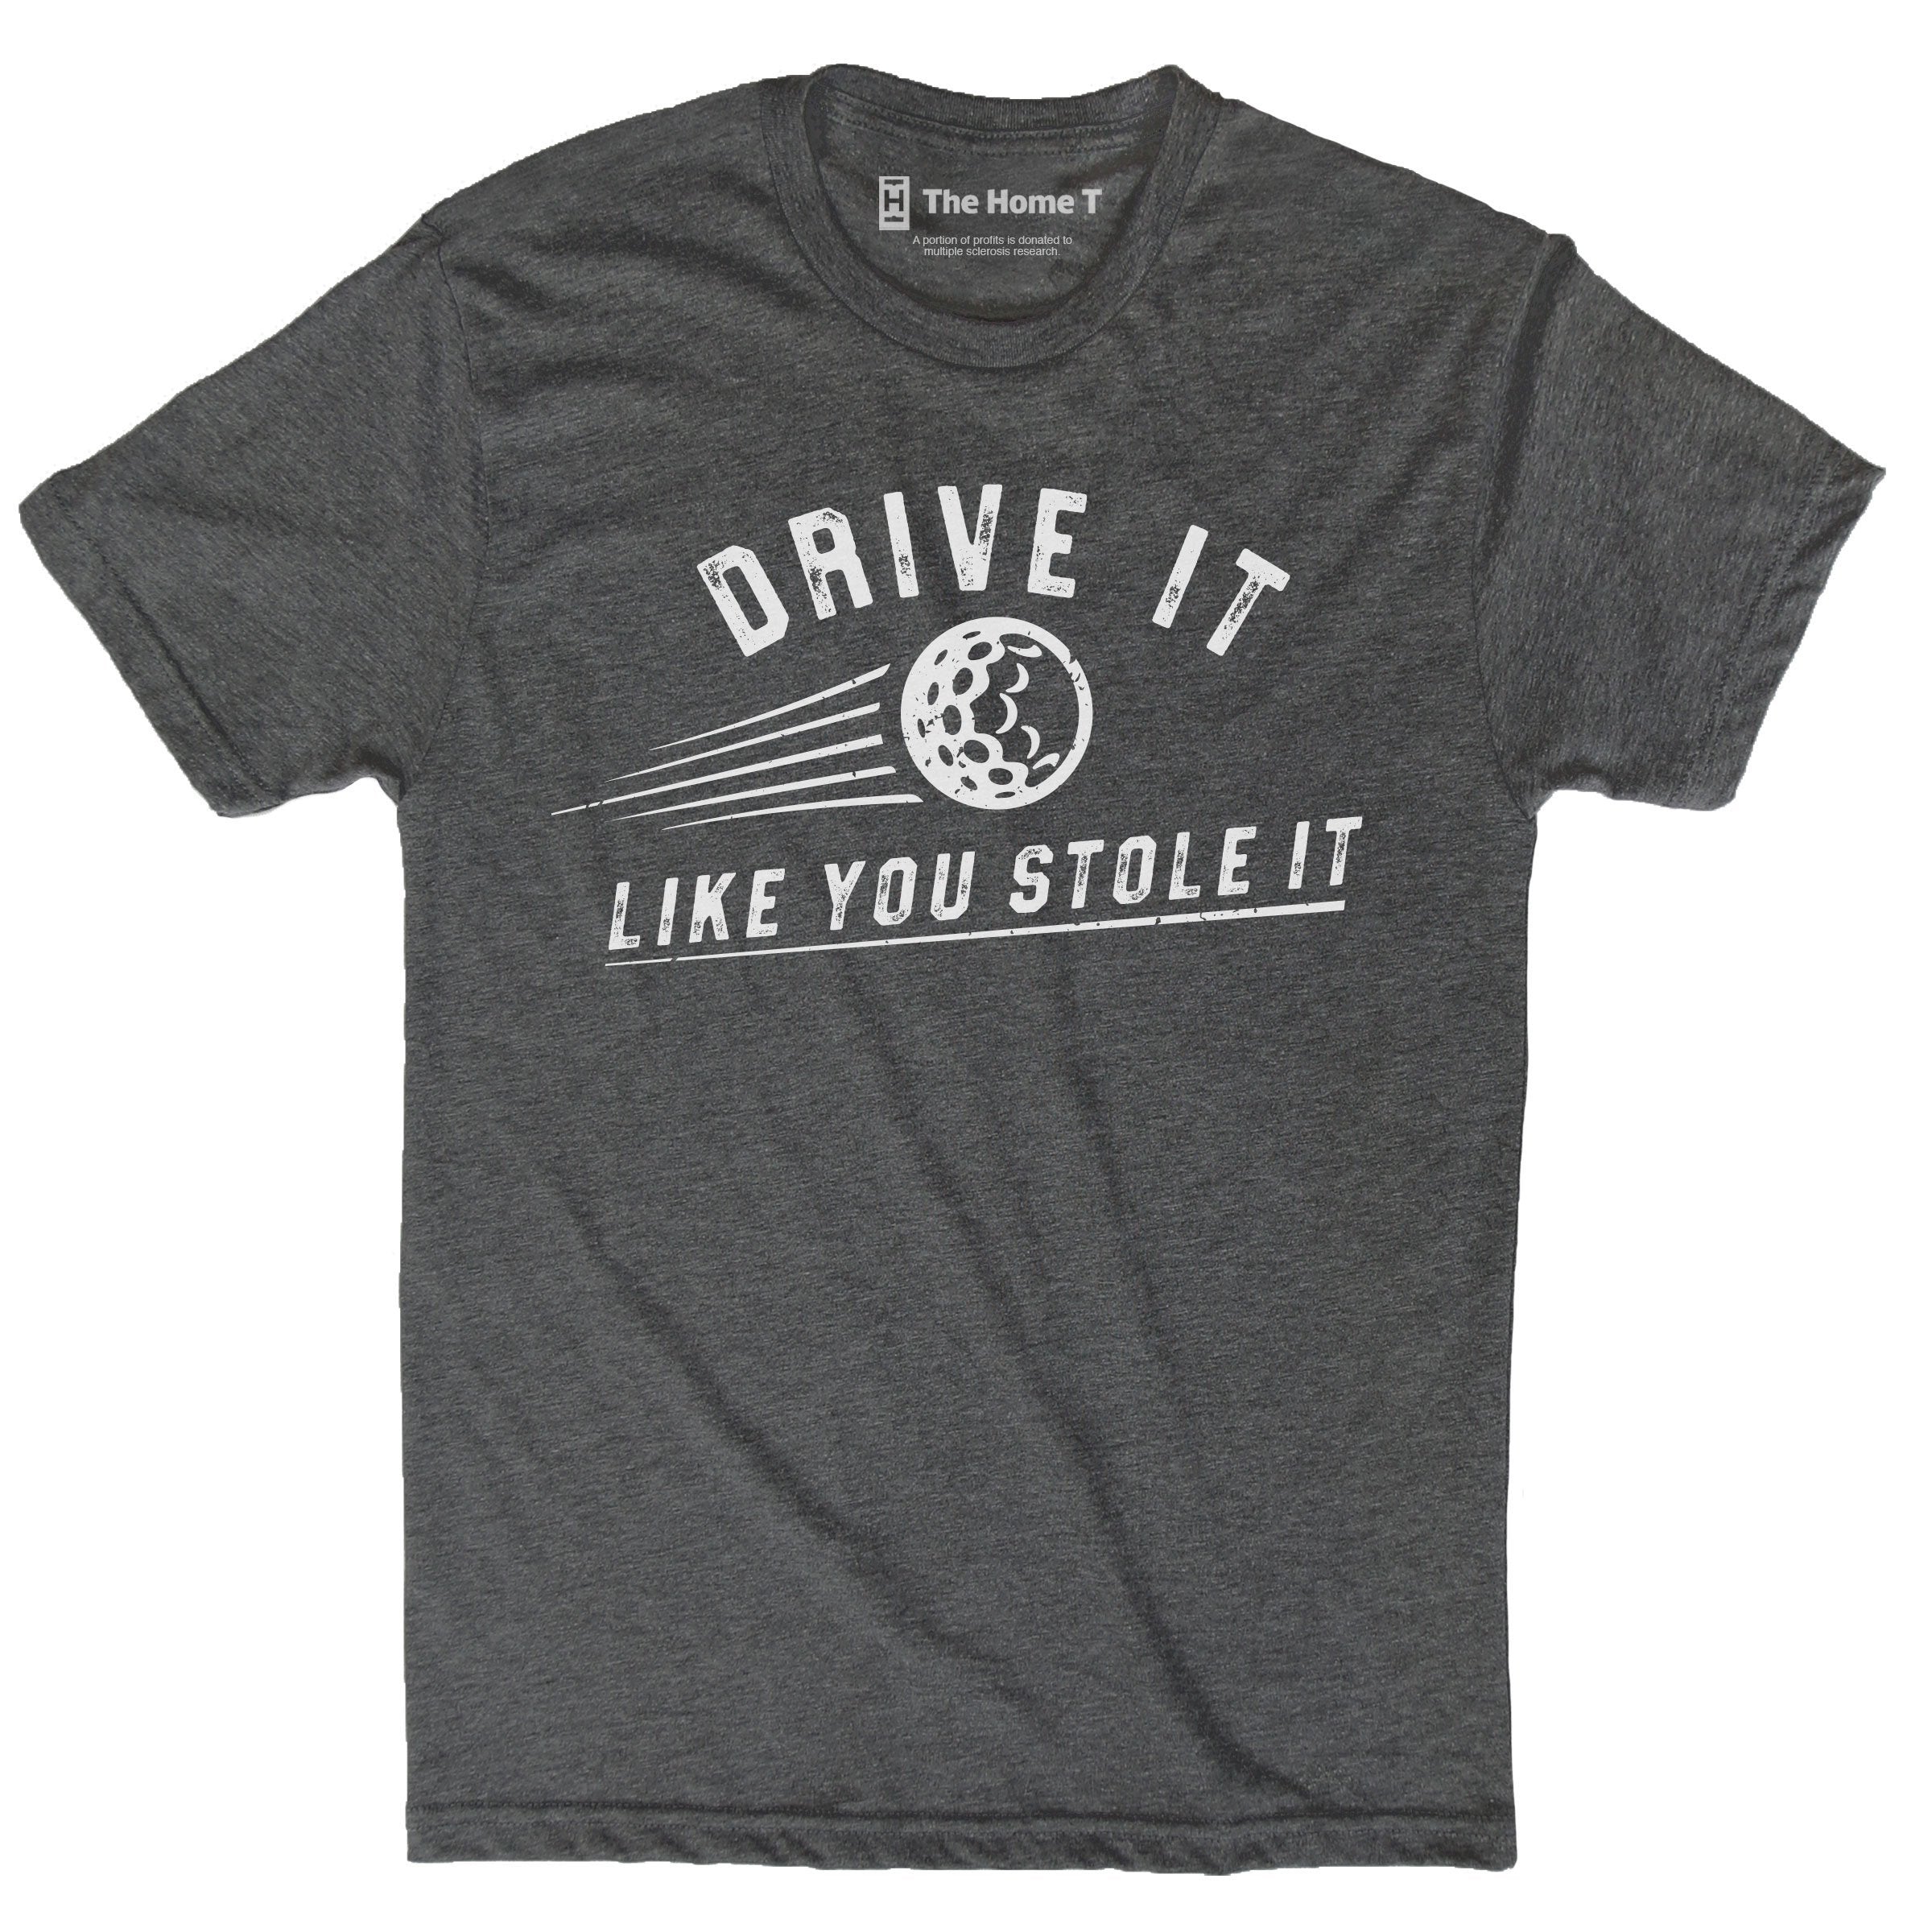 Drive It Like You Stole It Crew neck The Home T